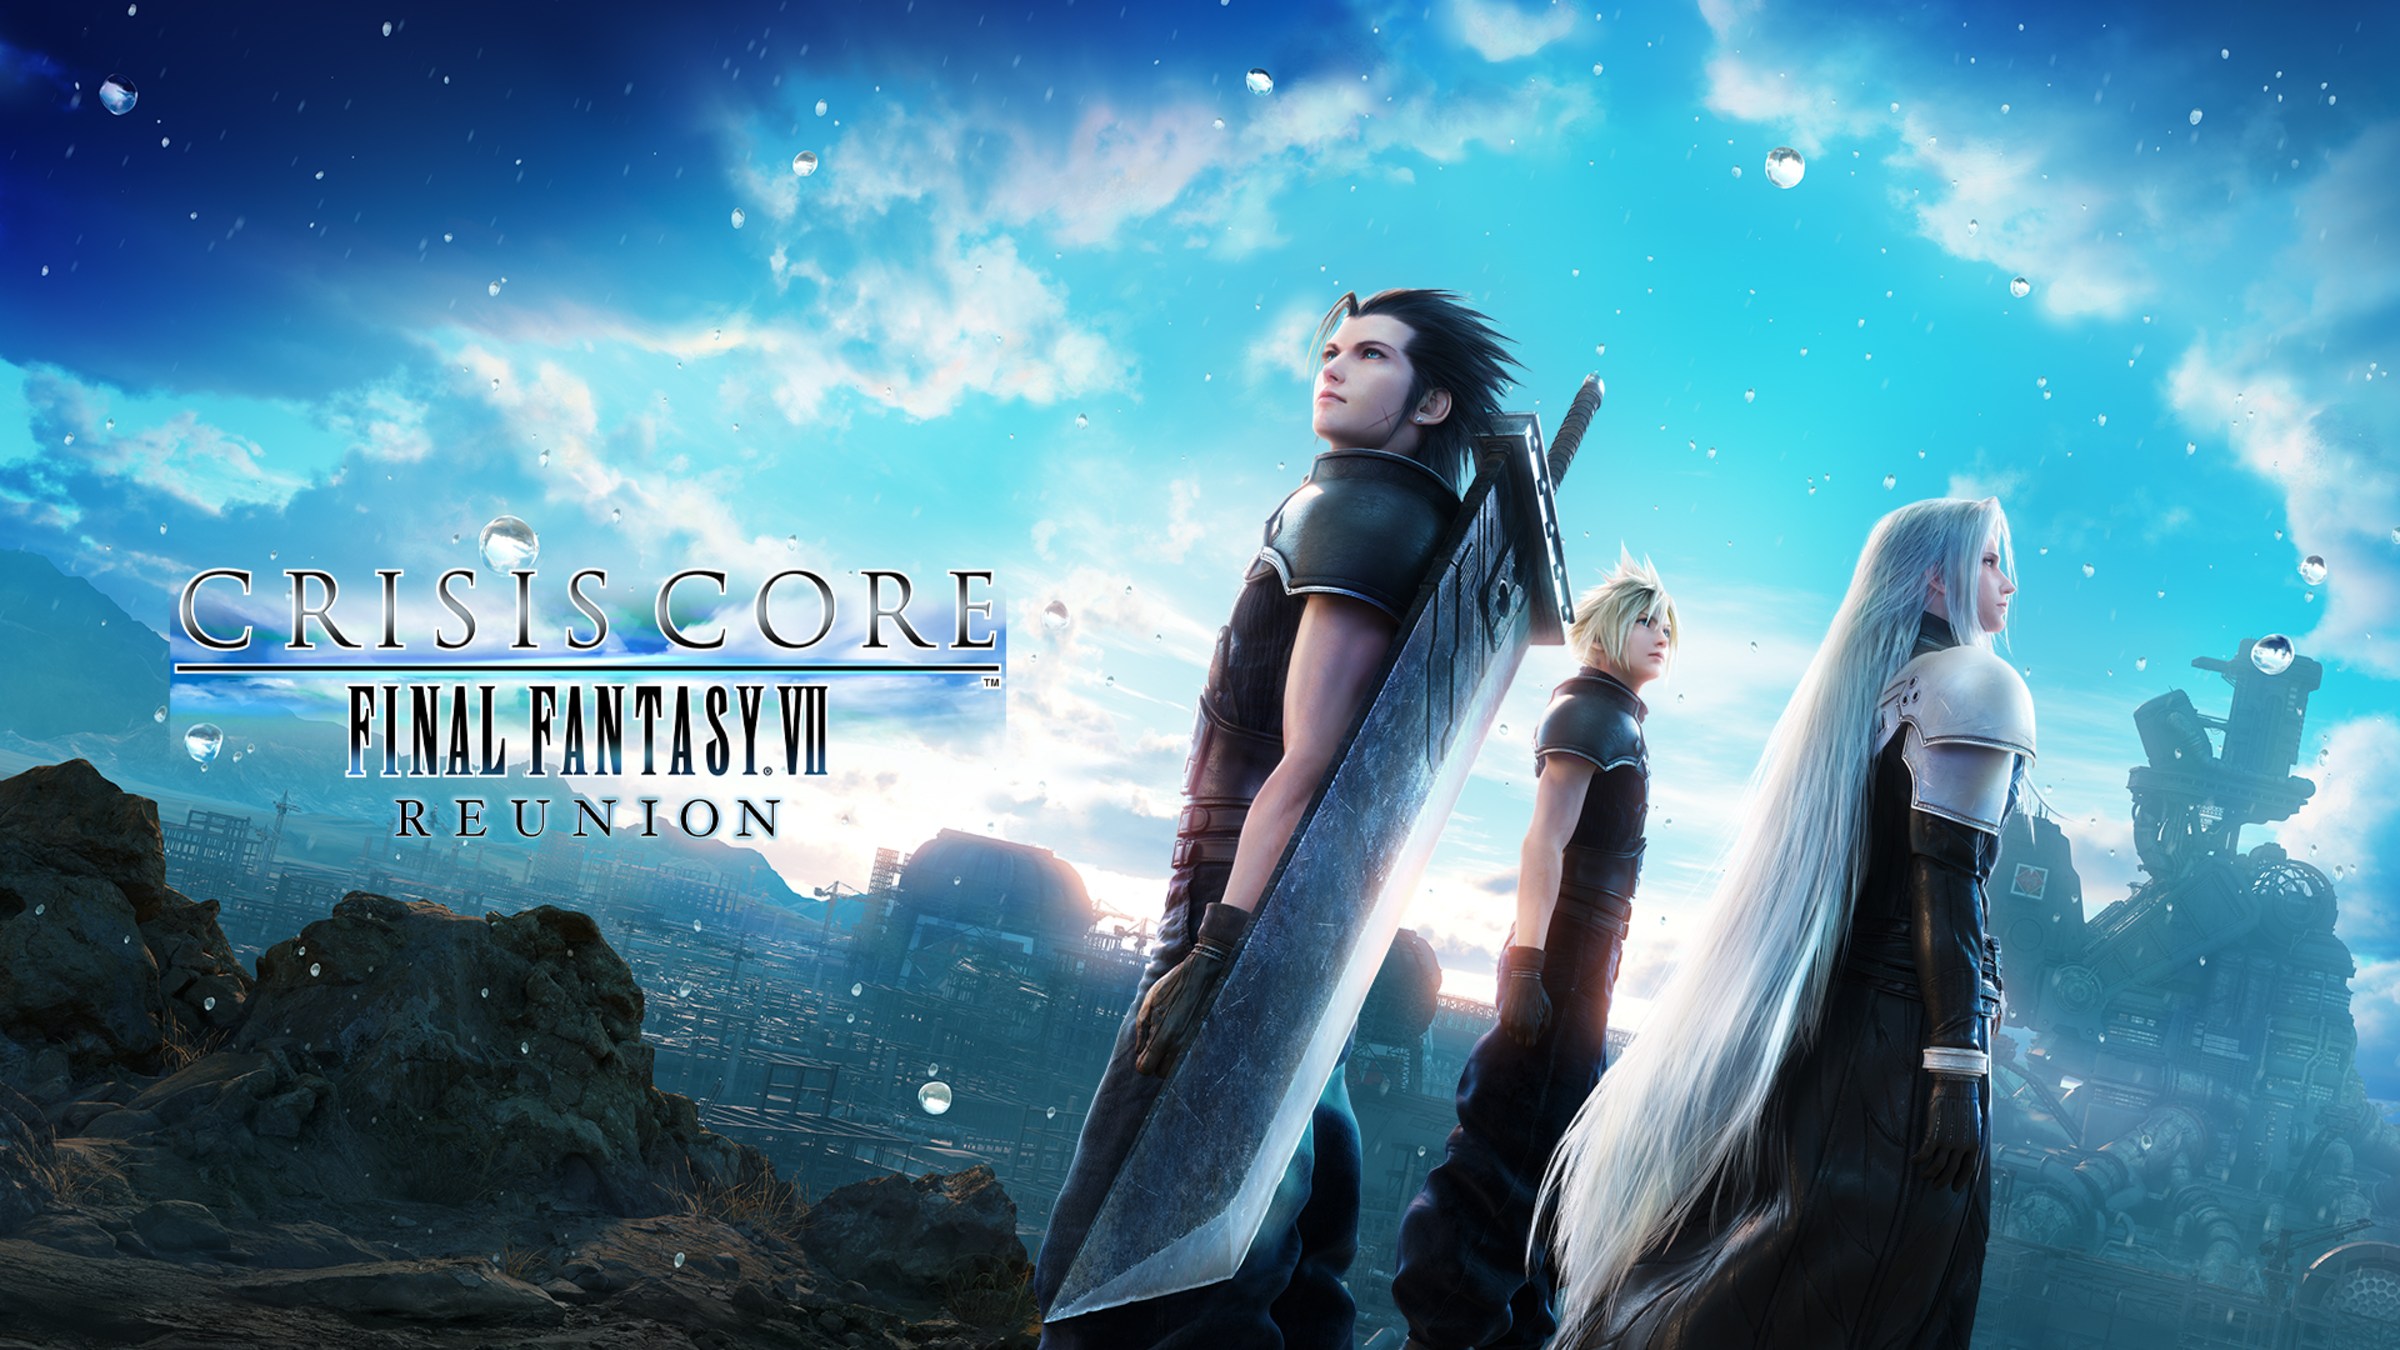 Final Fantasy Reunion is the lastest remade from Square Enix